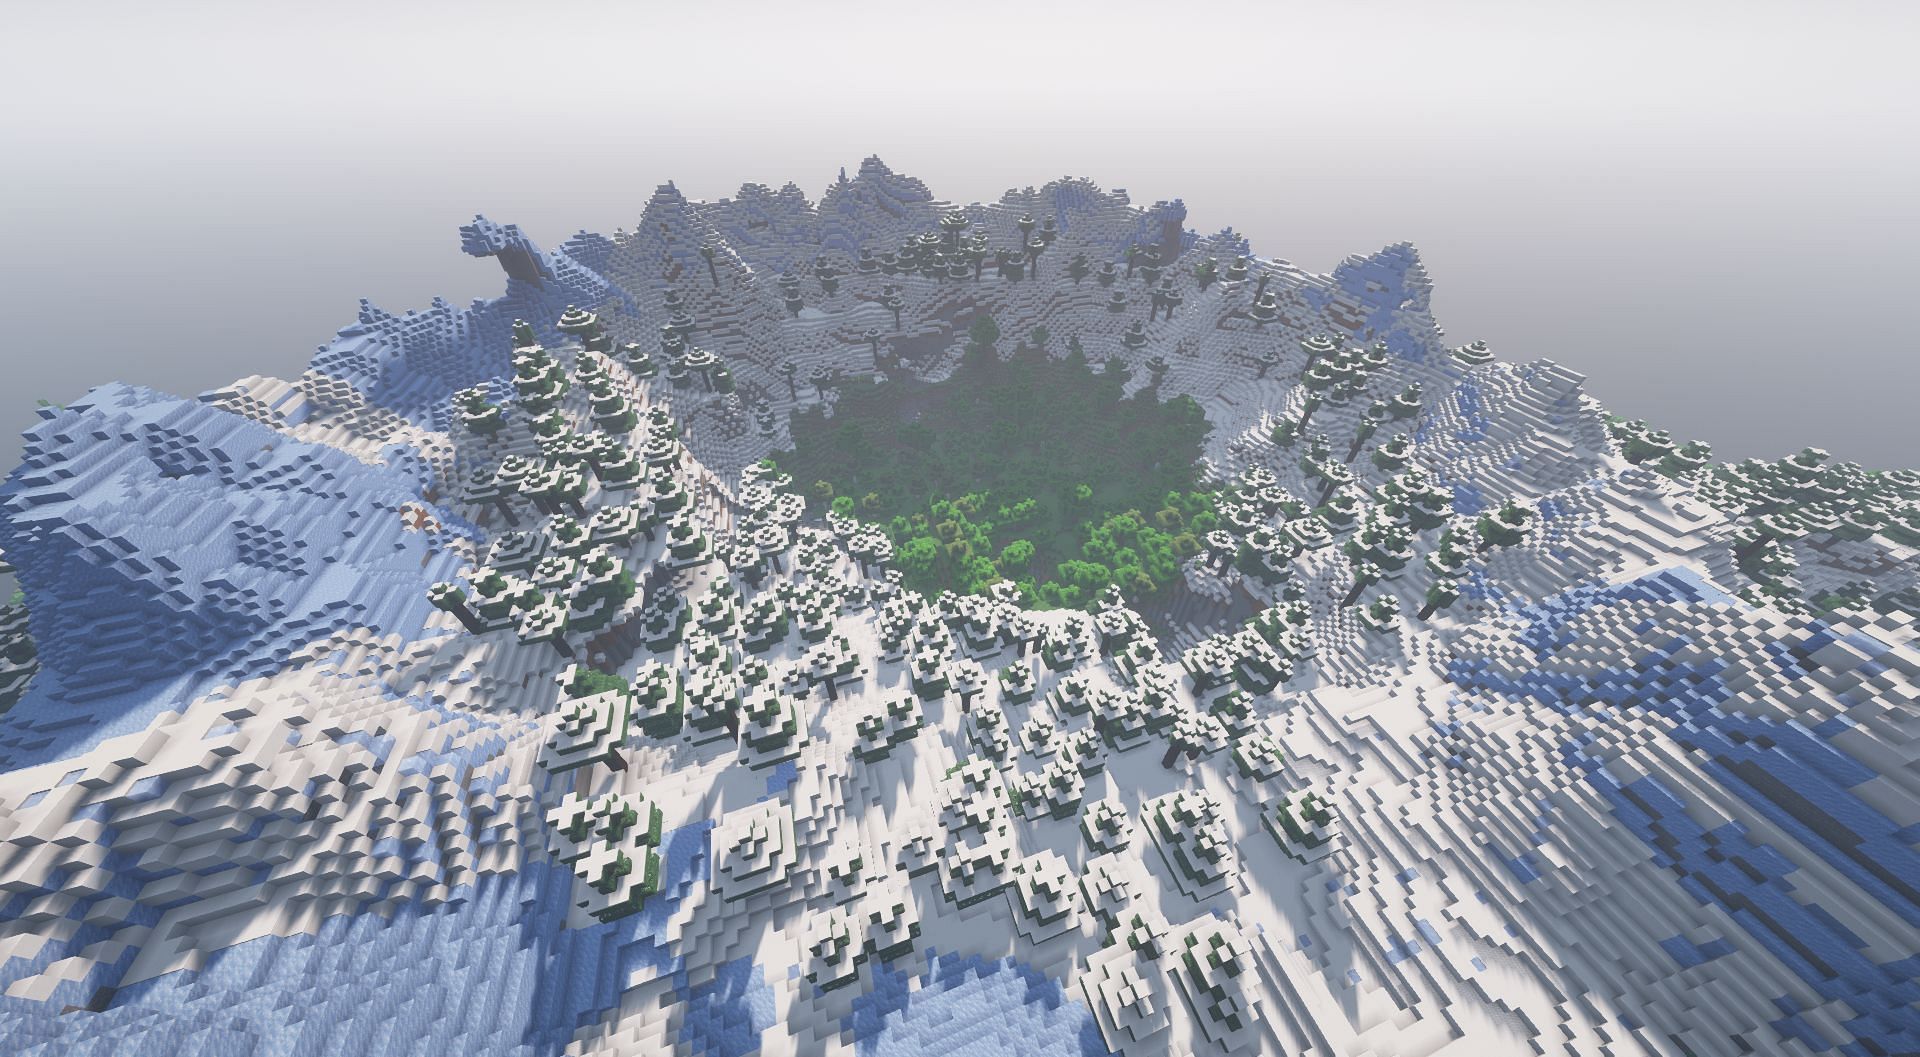 Forest valley surrounded by mountains (Image via Mojang)